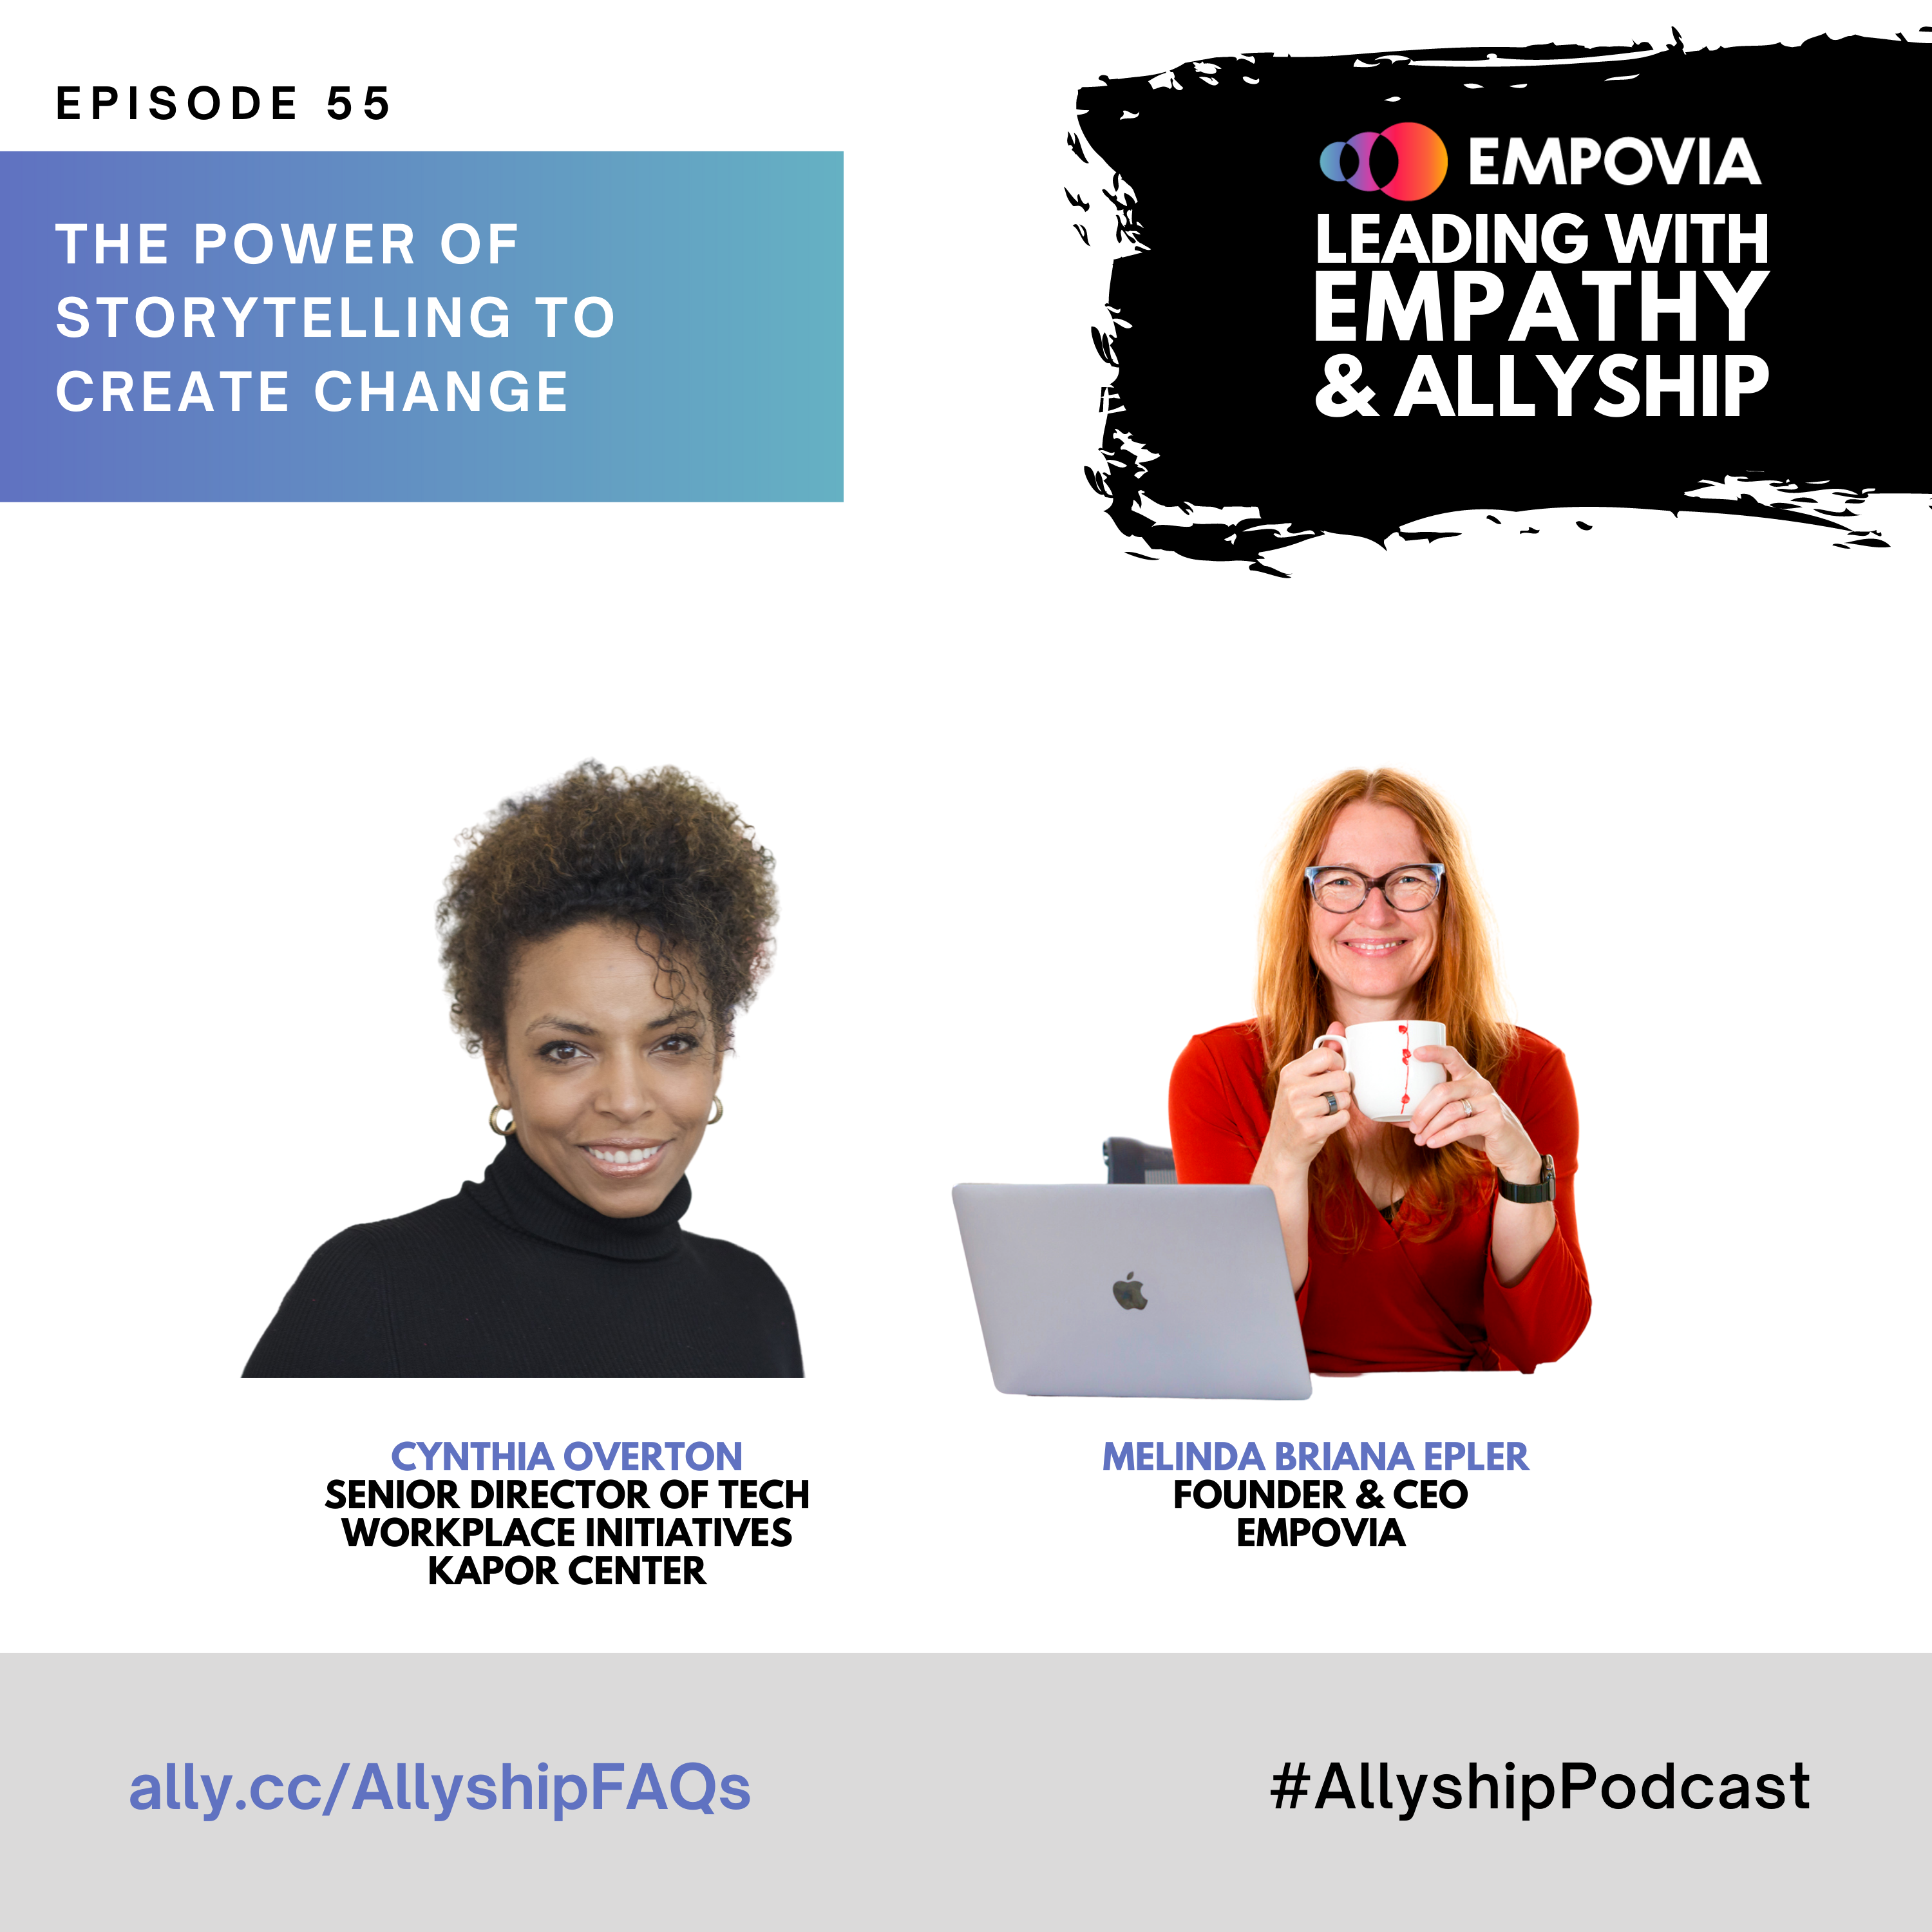 Leading With Empathy & Allyship promo with the Empovia logo and photos of Cynthia Overton; a Black woman with natural, curly hair swept up wearing a black turtleneck; and host Melinda Briana Epler; a White woman with red hair, glasses, and orange shirt holding a white mug behind a laptop.